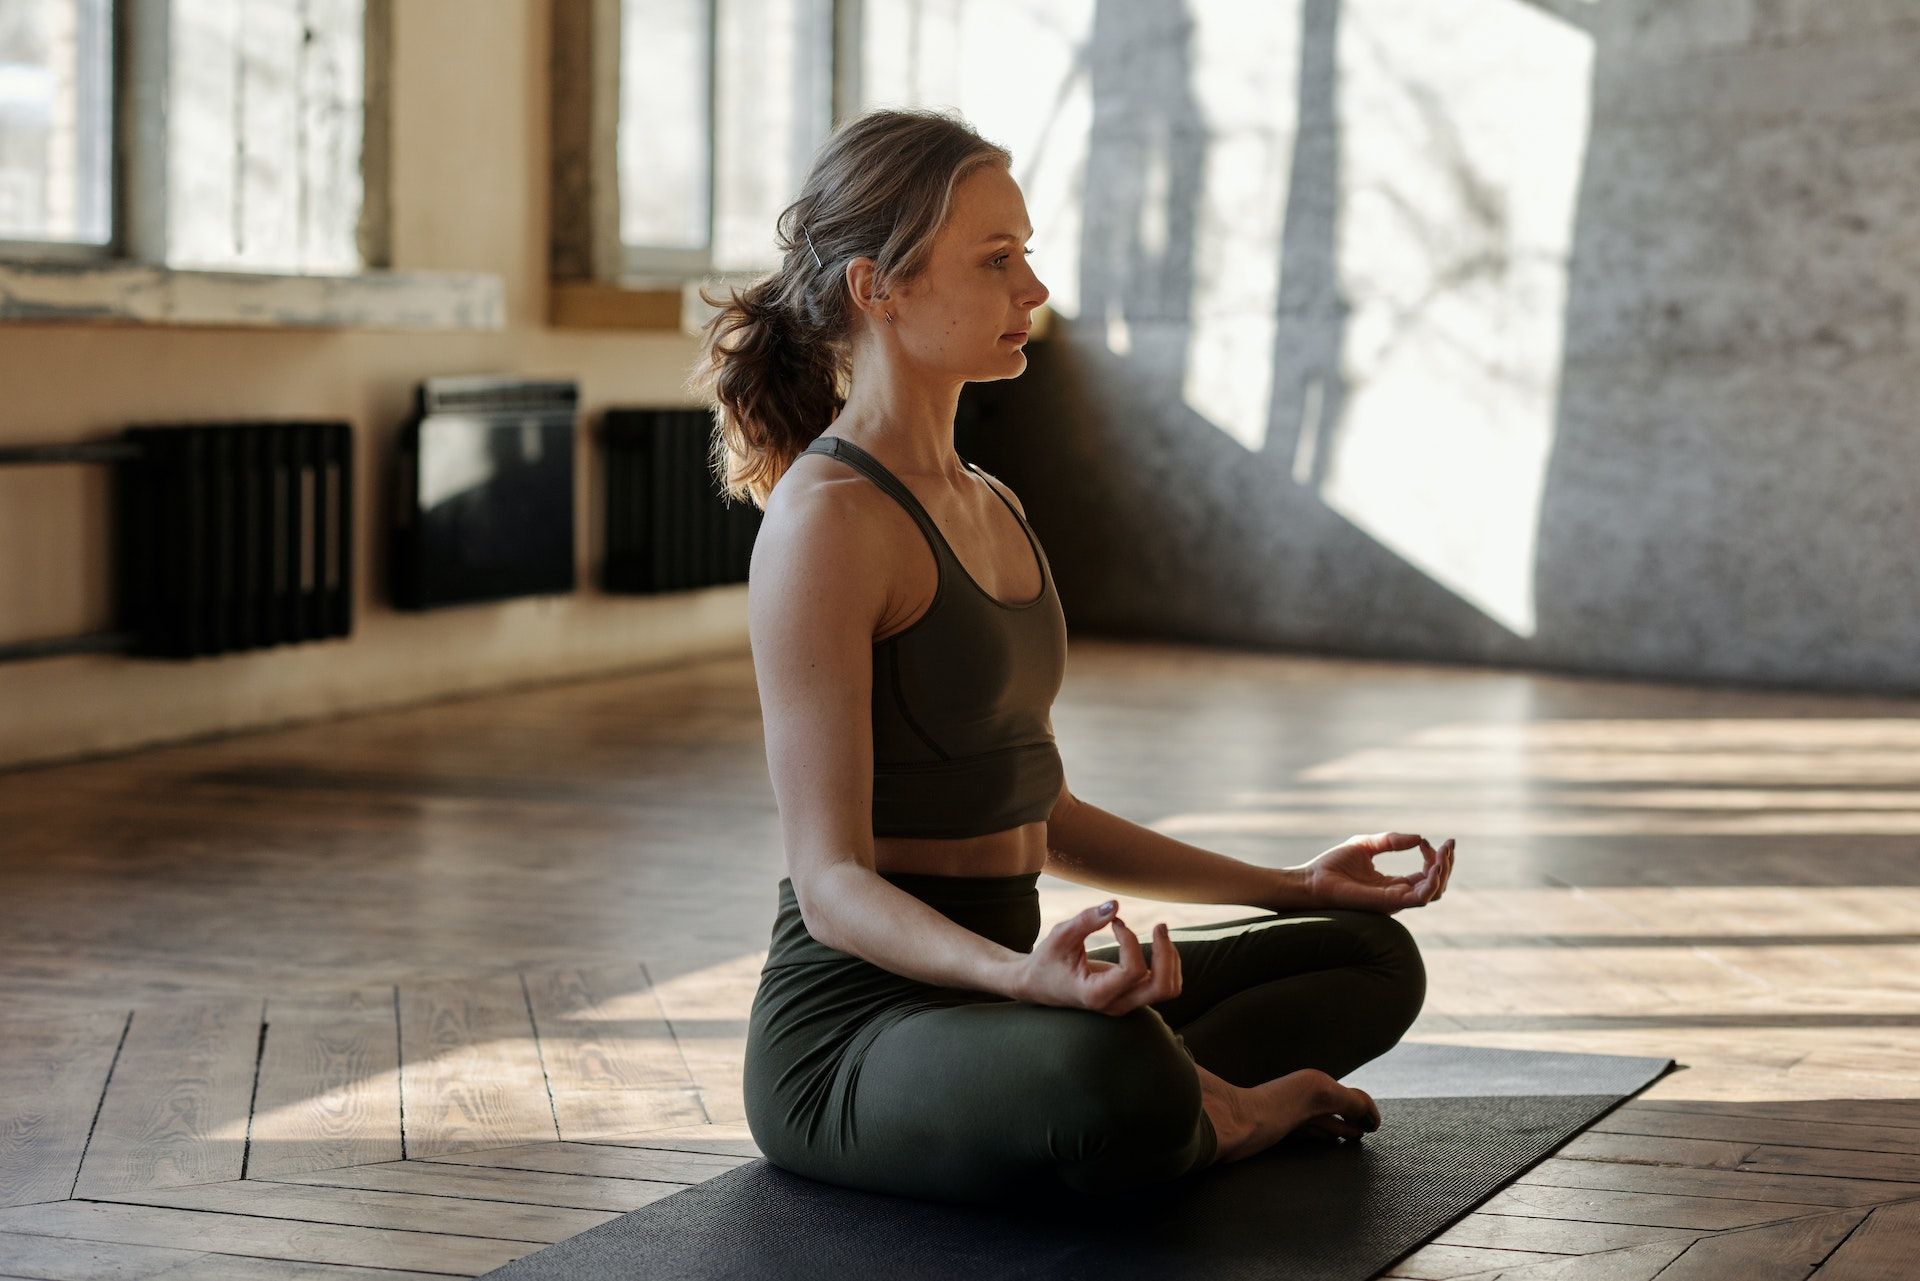 What To Expect From A Private Yoga Session